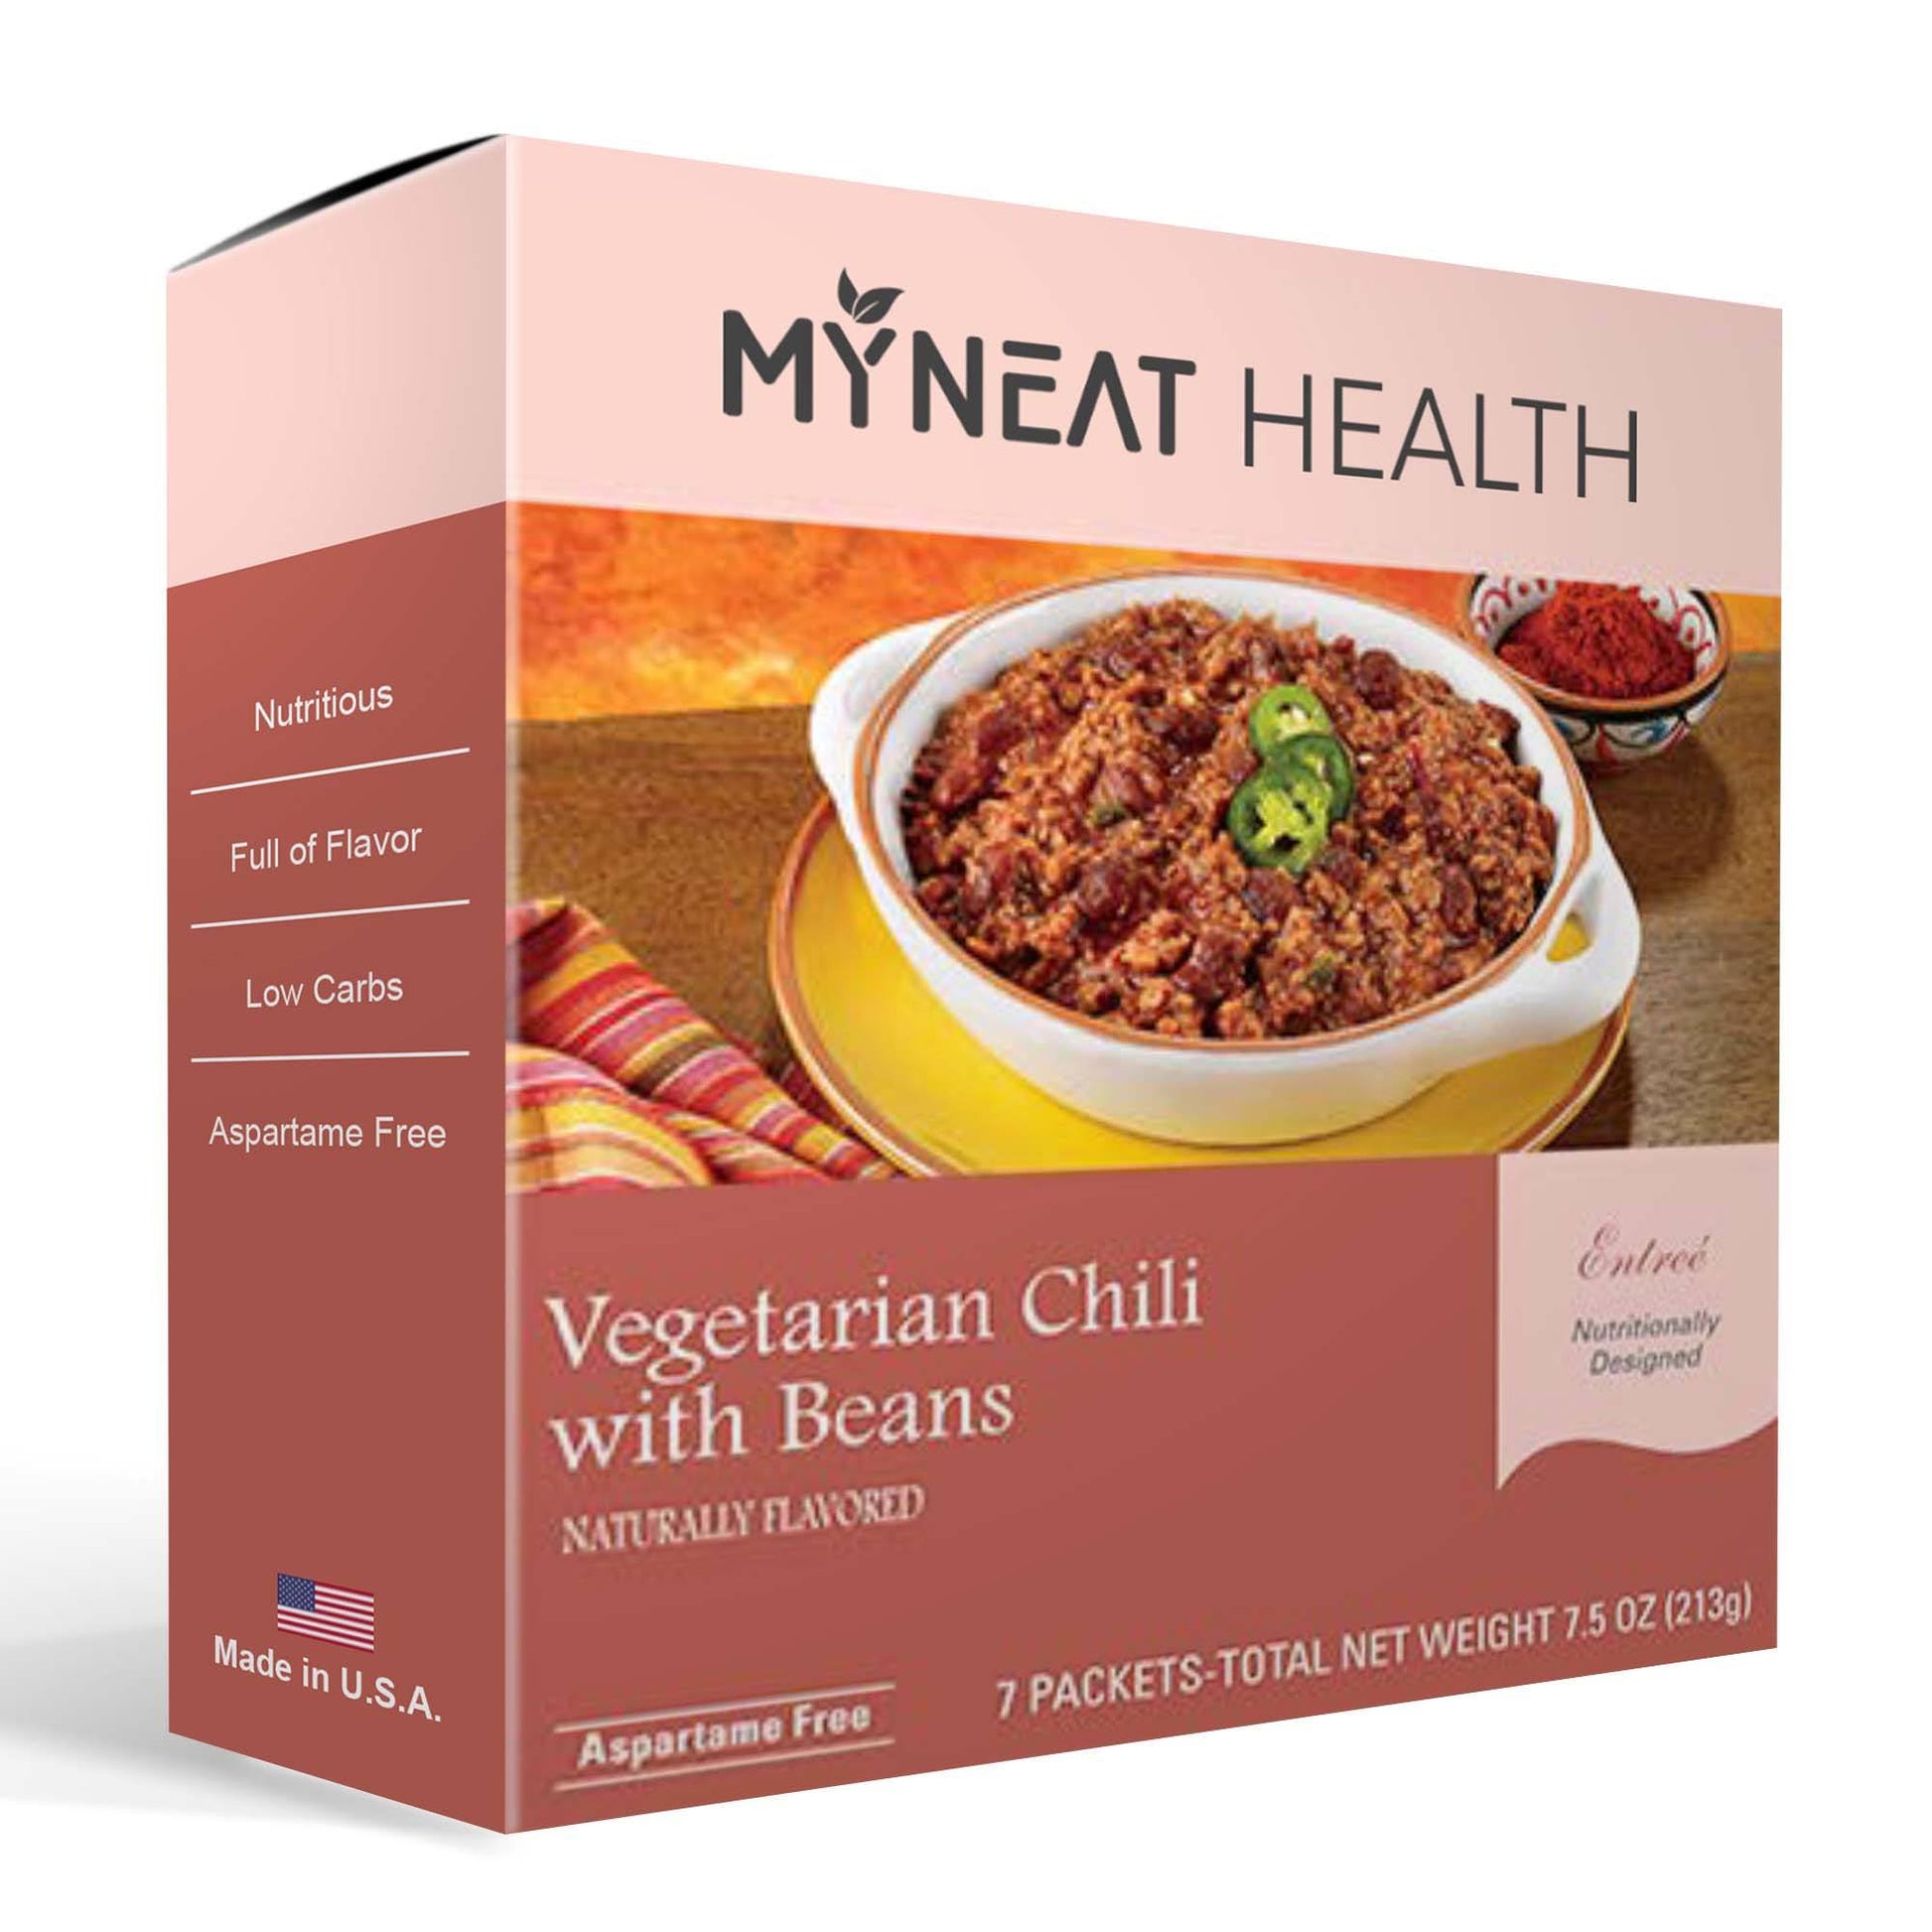 My Neat Healthy Vegetarian Chili with beans